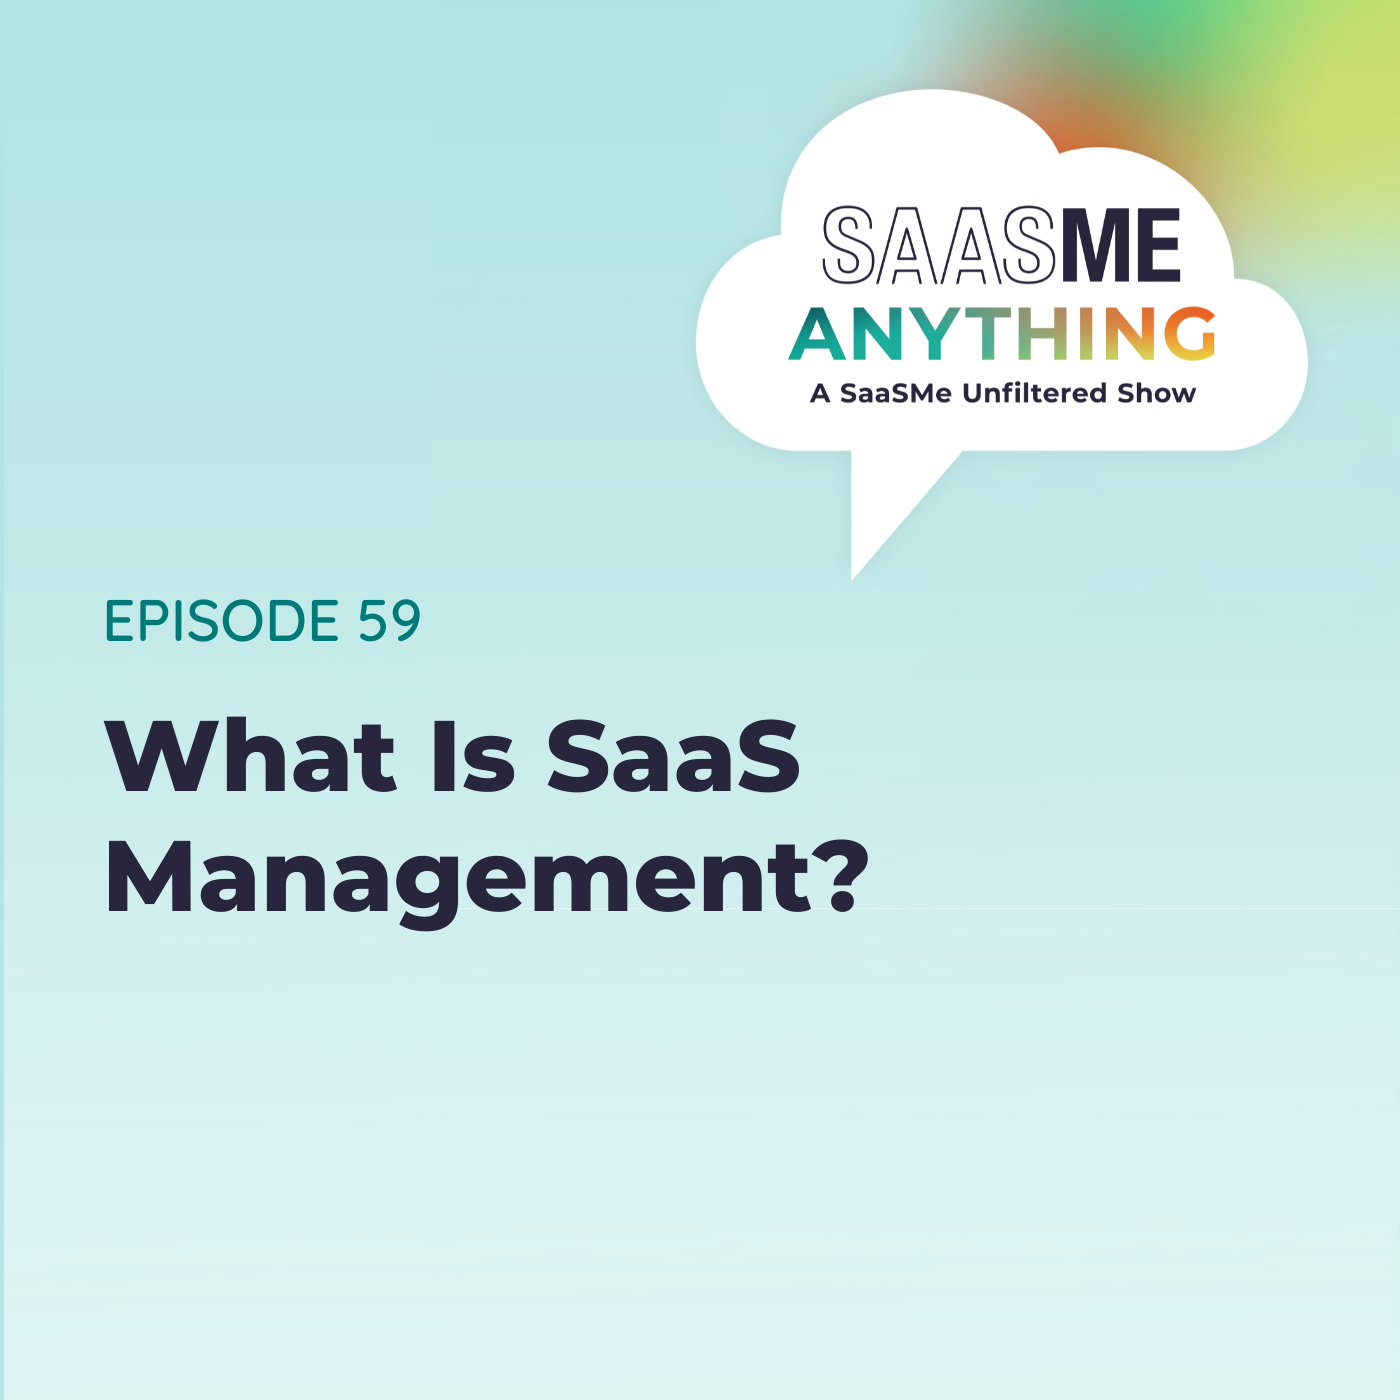 What Is SaaS Management?